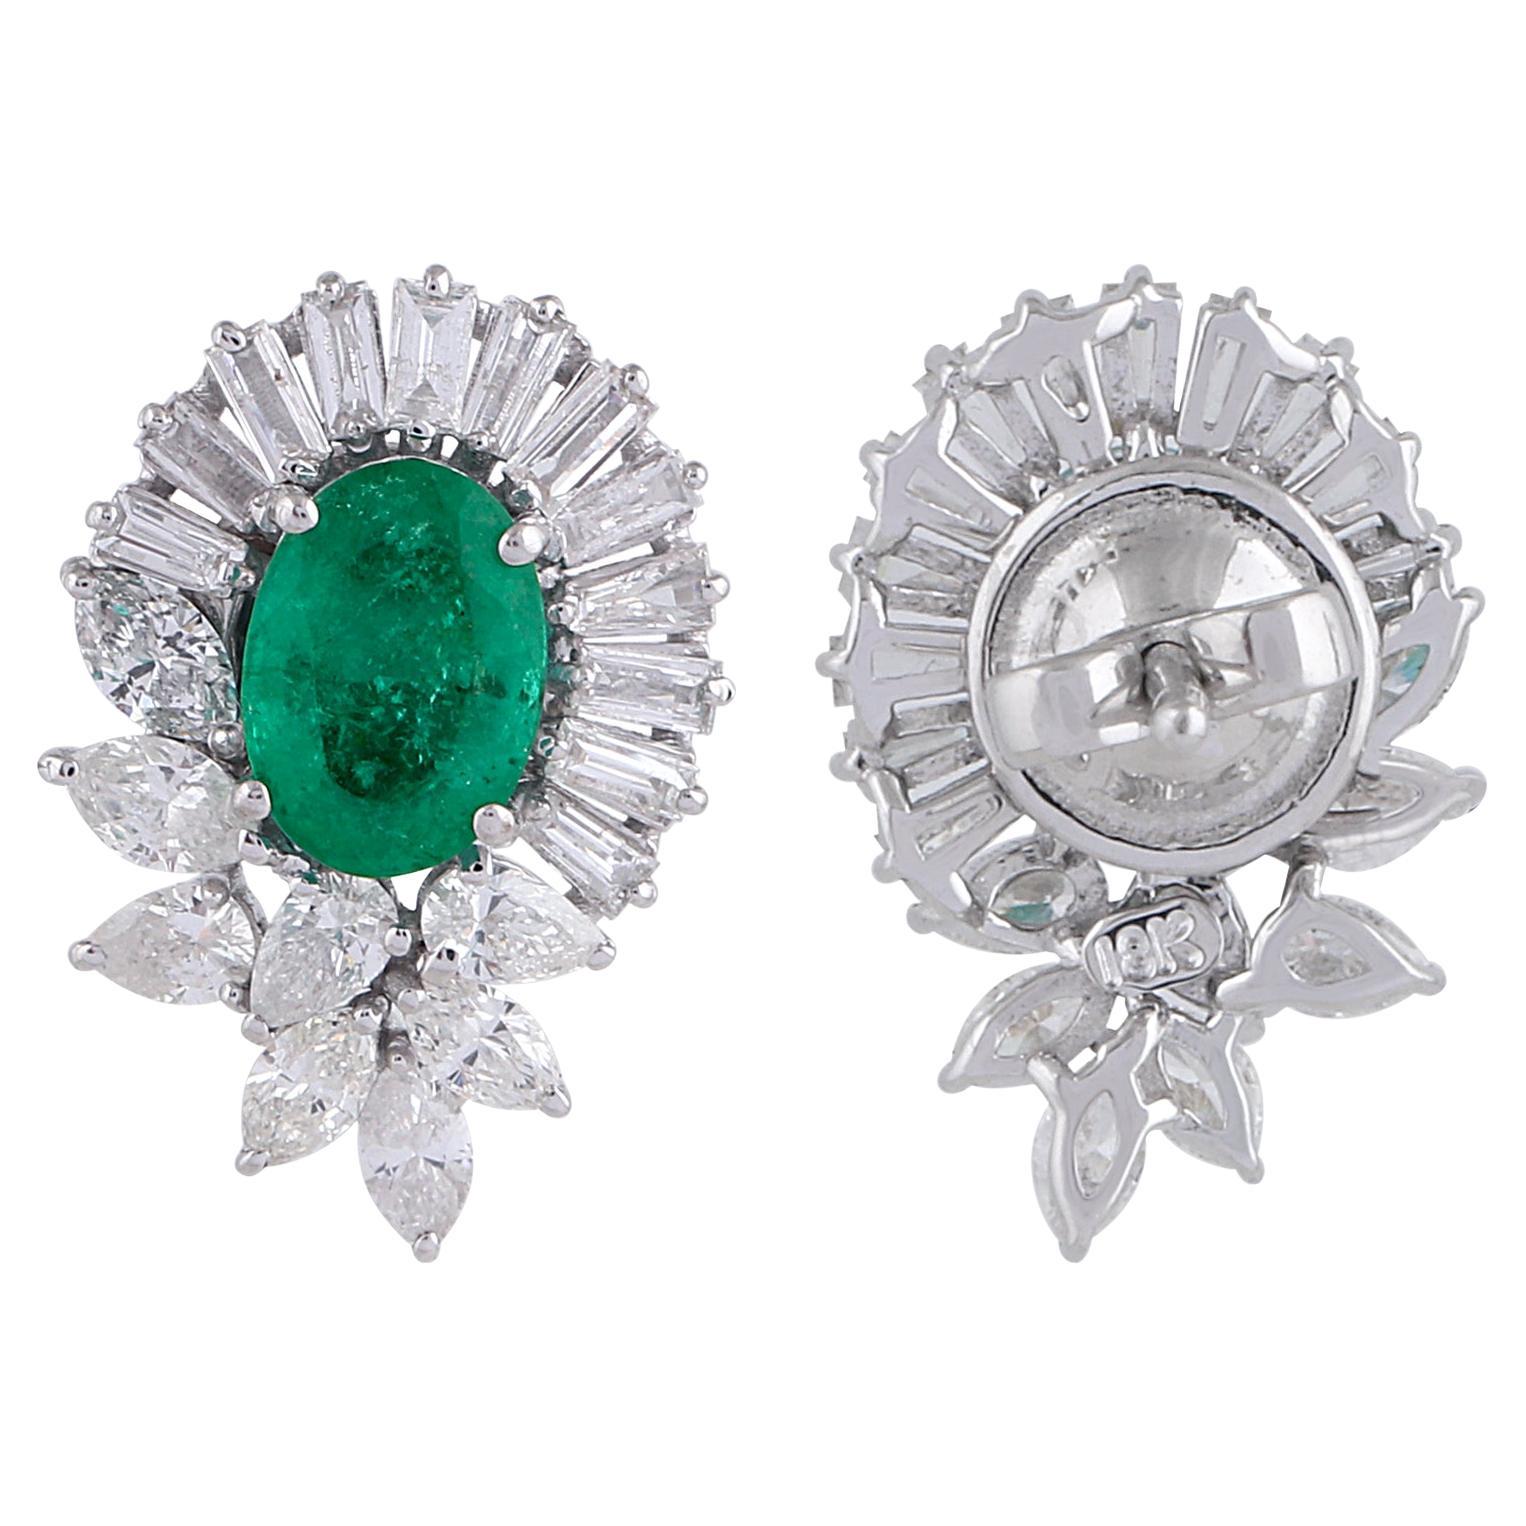 Pear Baguette Diamond Stud Earrings Natural Emerald Solid 14k White Gold Jewelry